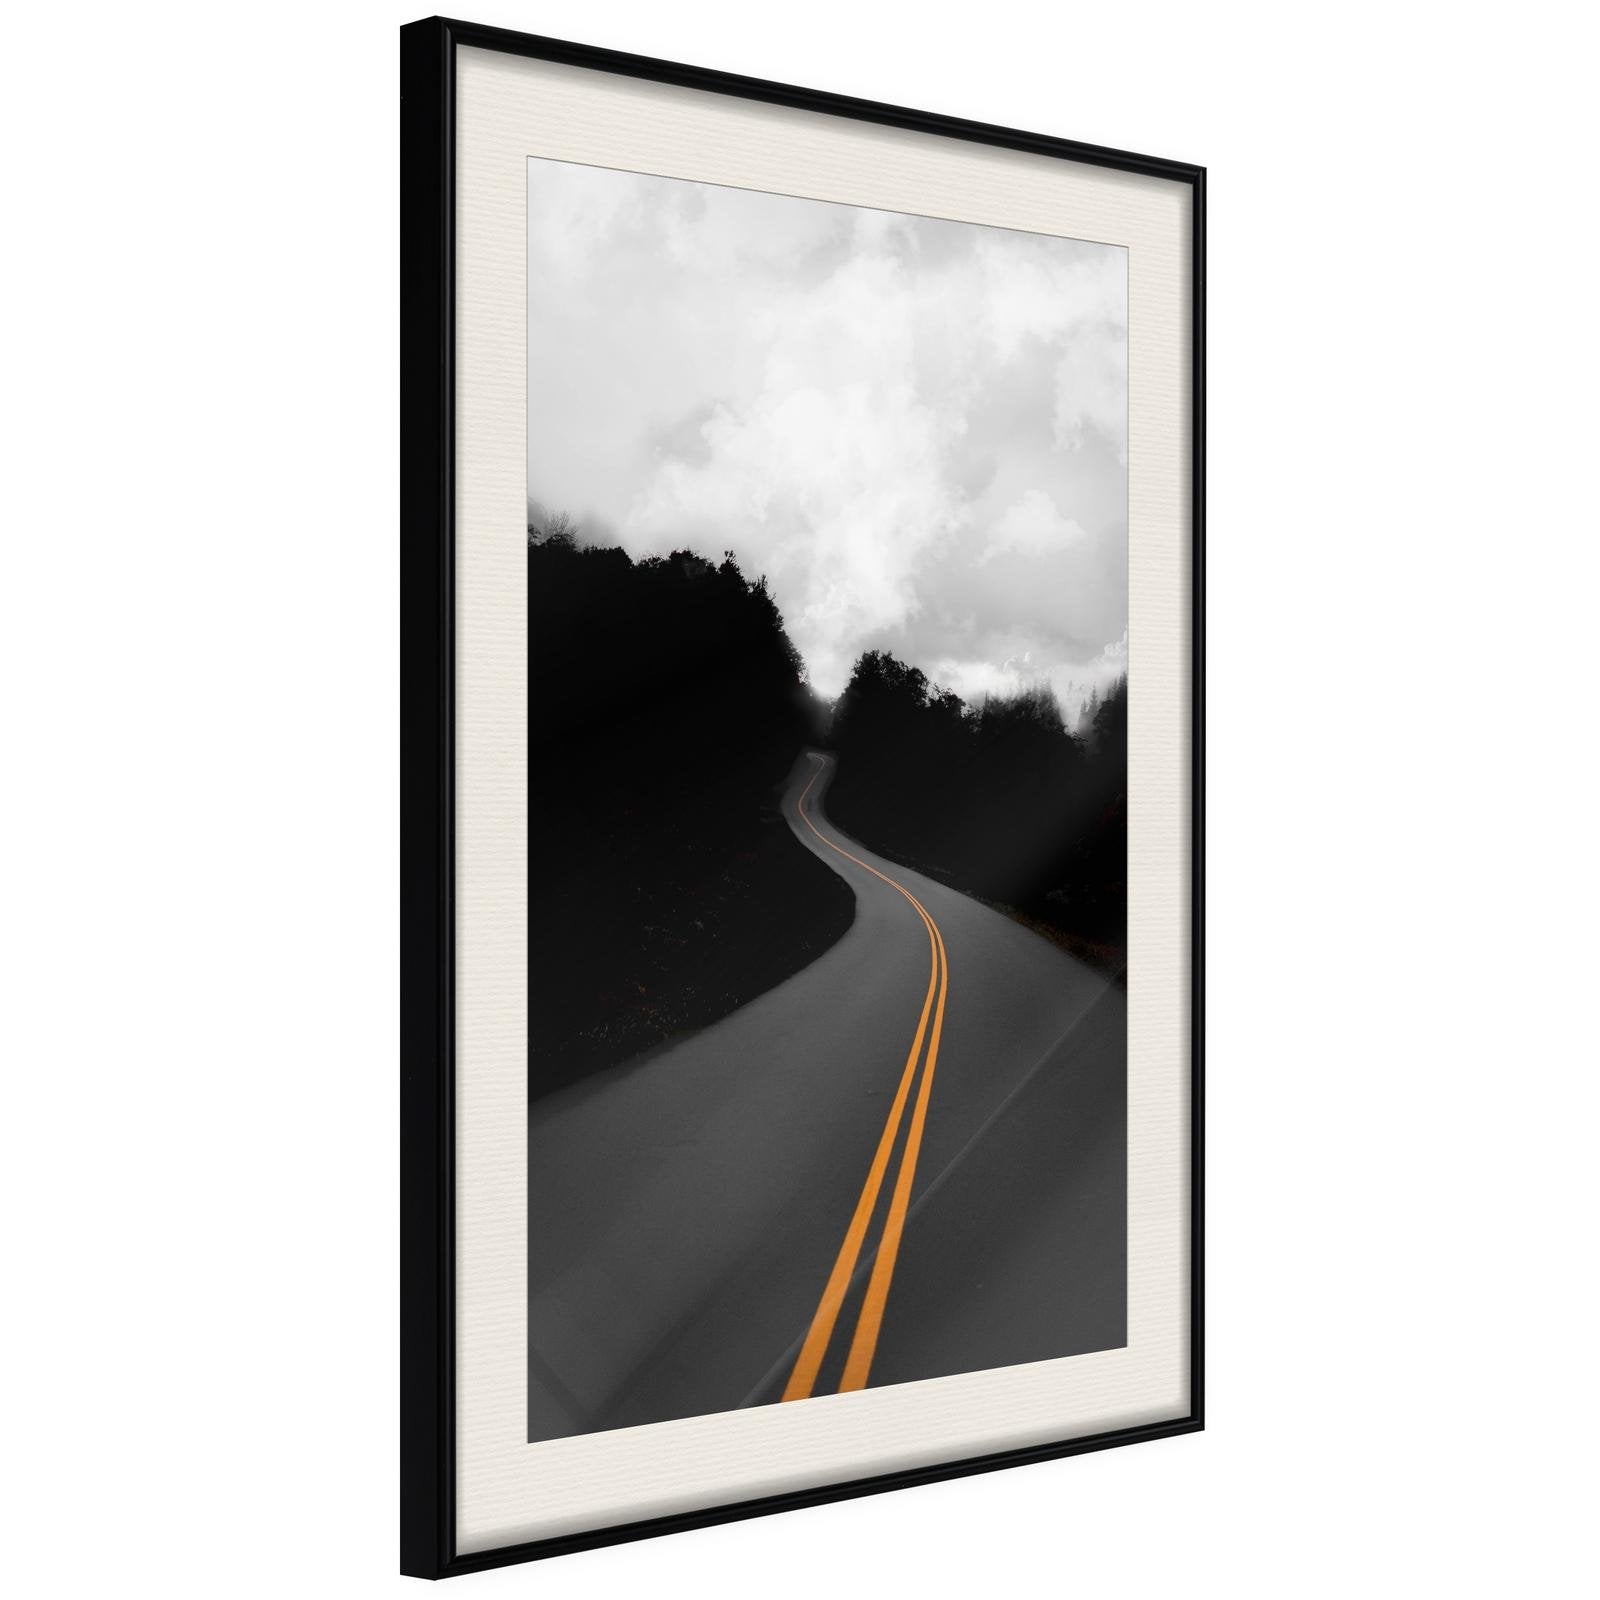 Inramad Poster / Tavla - Road Into the Unknown-Poster Inramad-Artgeist-20x30-Svart ram med passepartout-peaceofhome.se